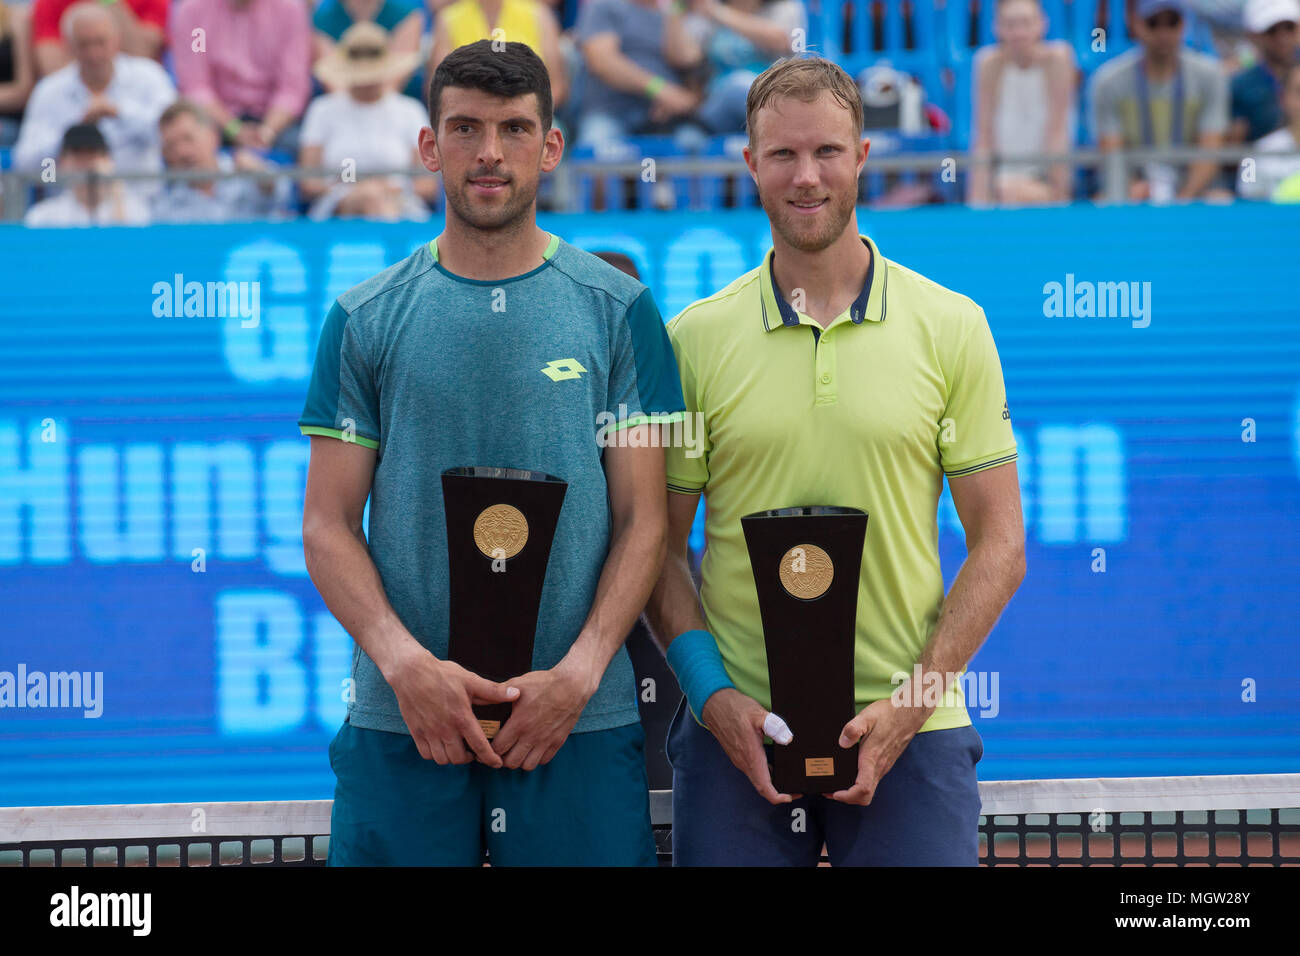 Budapest. 29th Apr, 2018. Dominic Inglot (R) of Britain and Franko Skugor  of Croatia attend the awarding ceremony after winning the men's doubles  final at the Hungarian Open ATP tournament in Budapest,